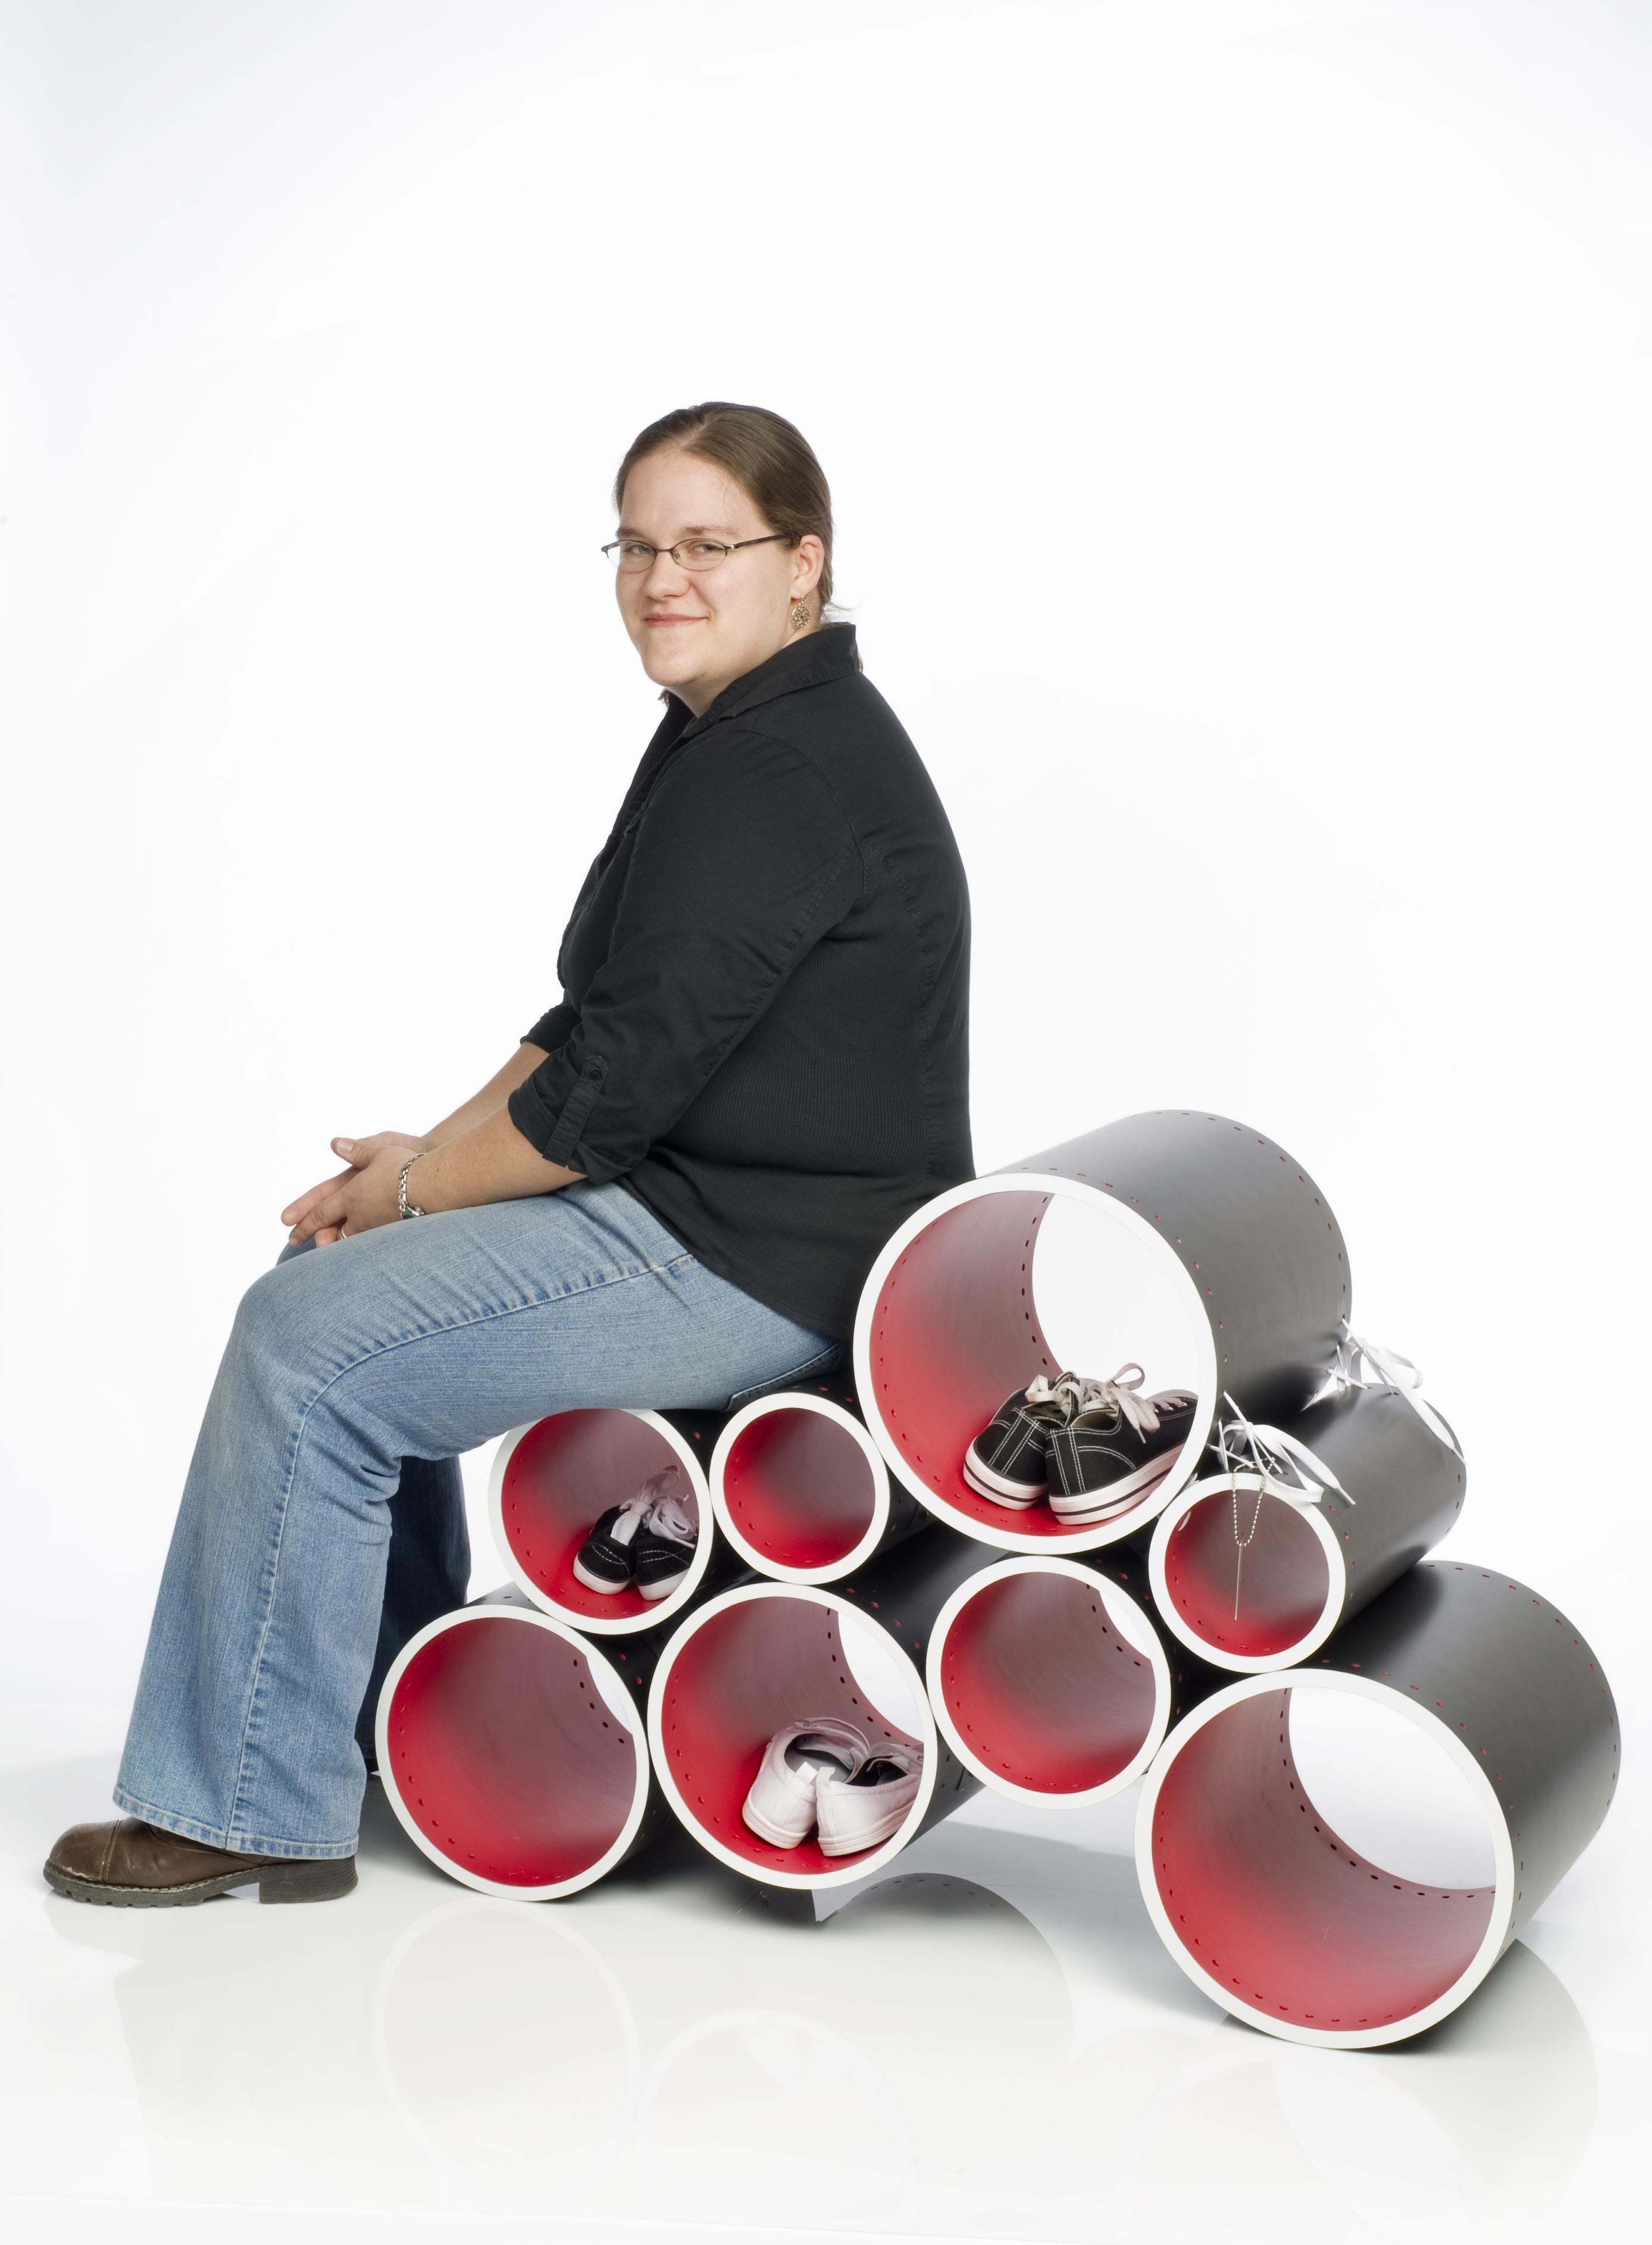 A person sits on a bench made of cylinder-shaped objects.